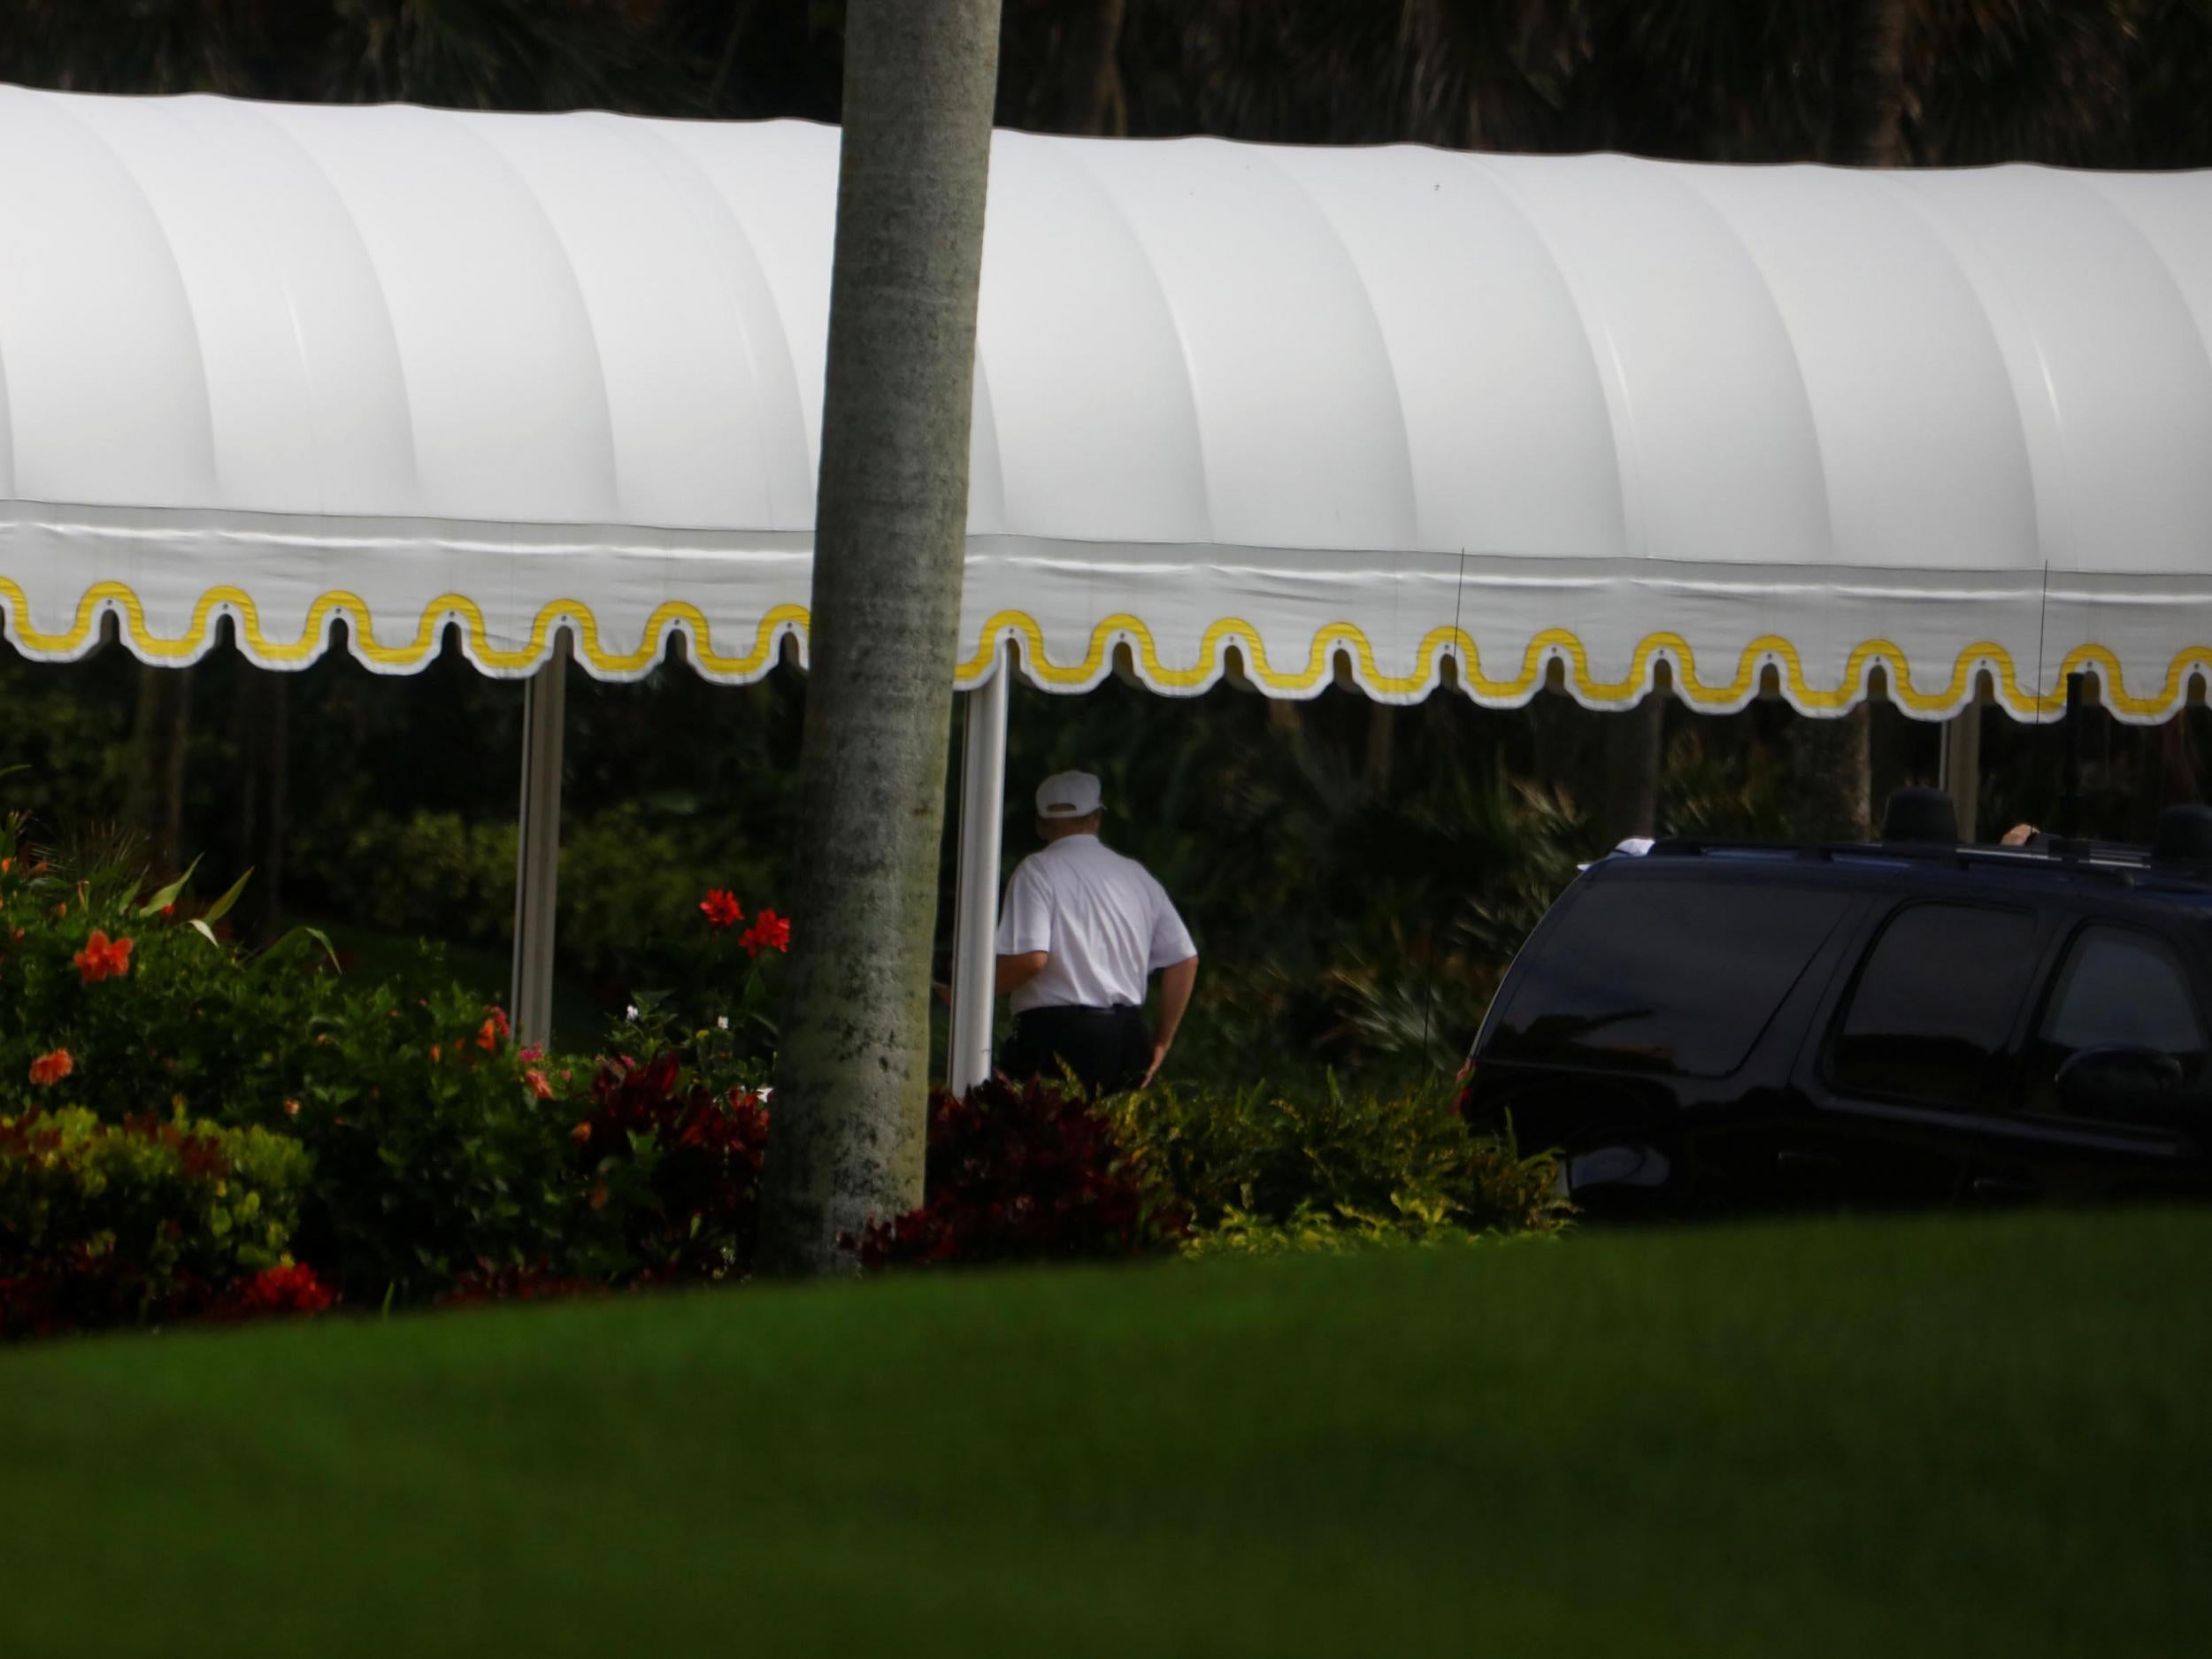 The President appeared to be dressed for a round as he arrived at his Mar-a-Lago estate in Palm Beach, Florida.